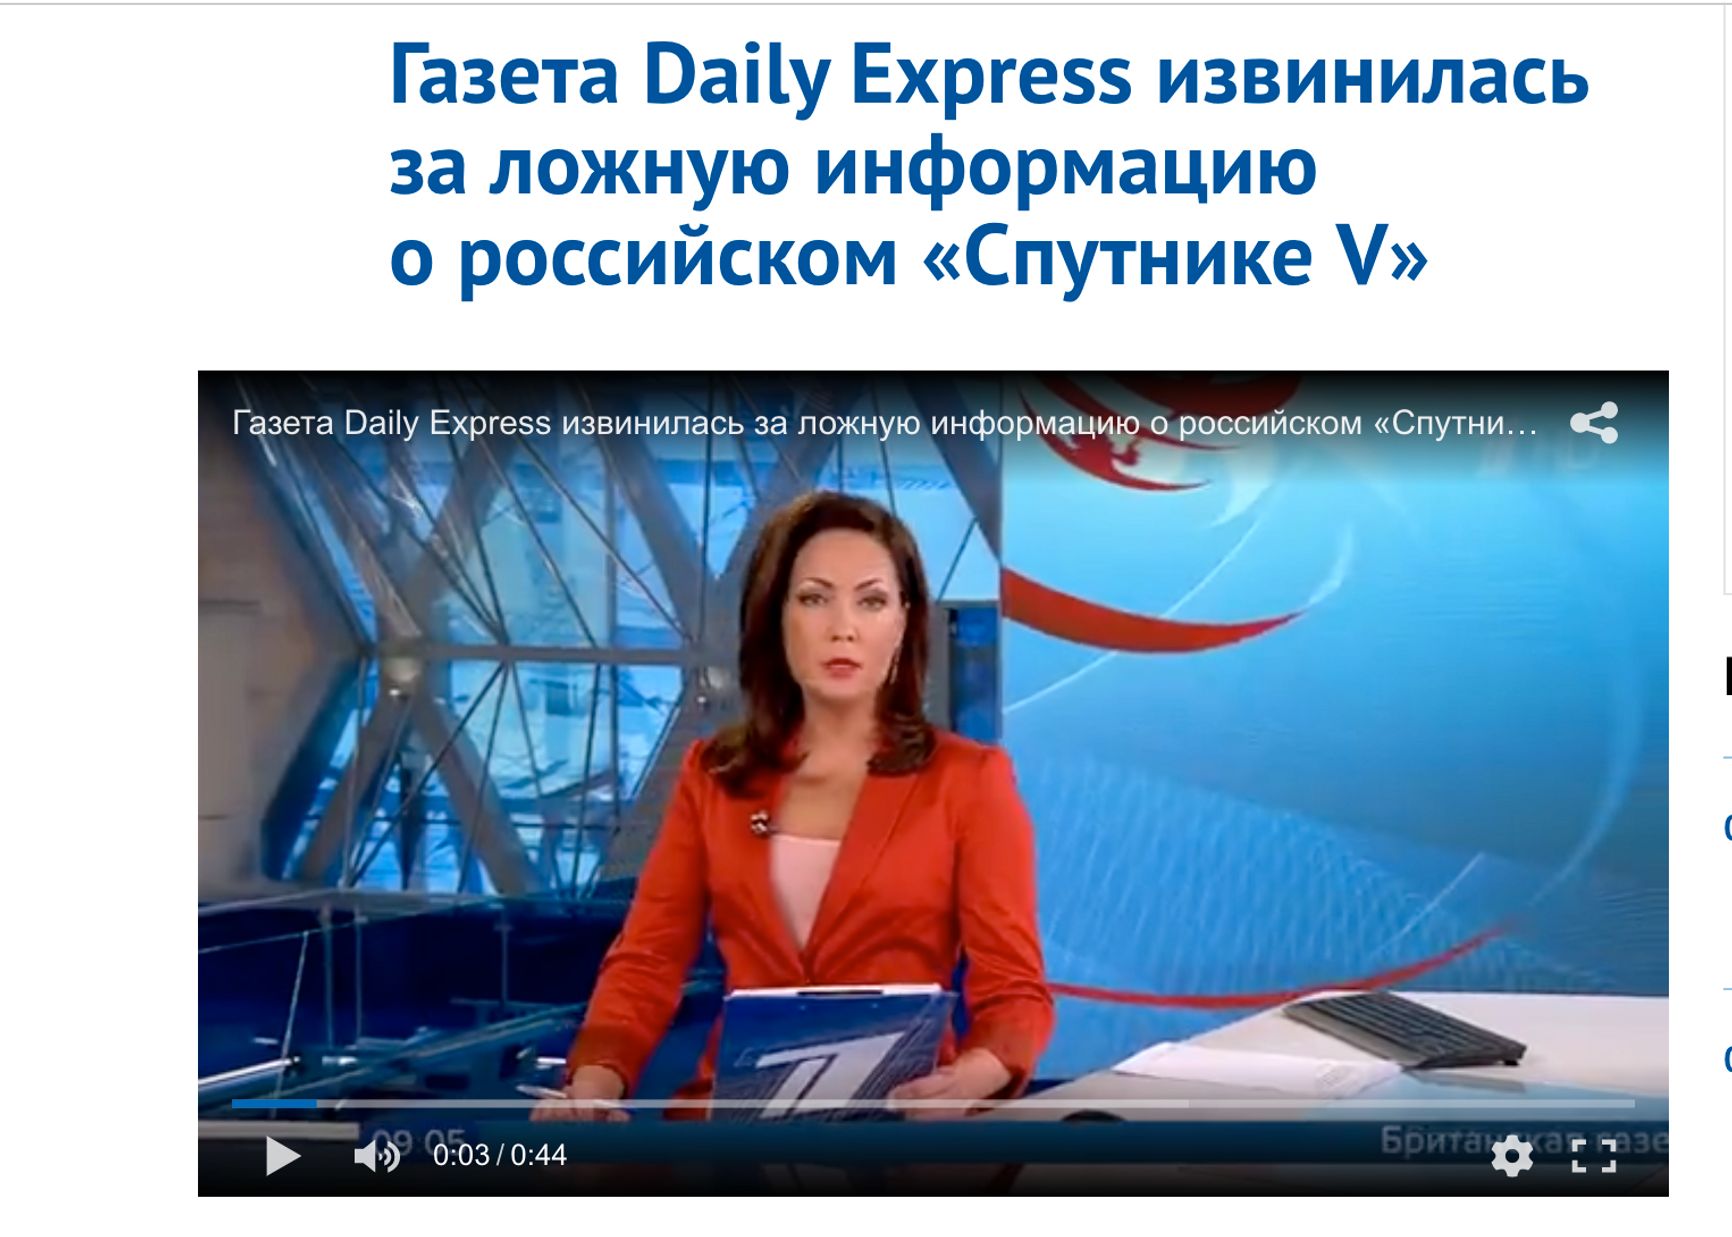 The title says: Britain's Daily Express newspaper has apologized for an article which said that Russia's Sputnik V team had allegedly used blueprints swiped from AstraZeneca to build its vaccine